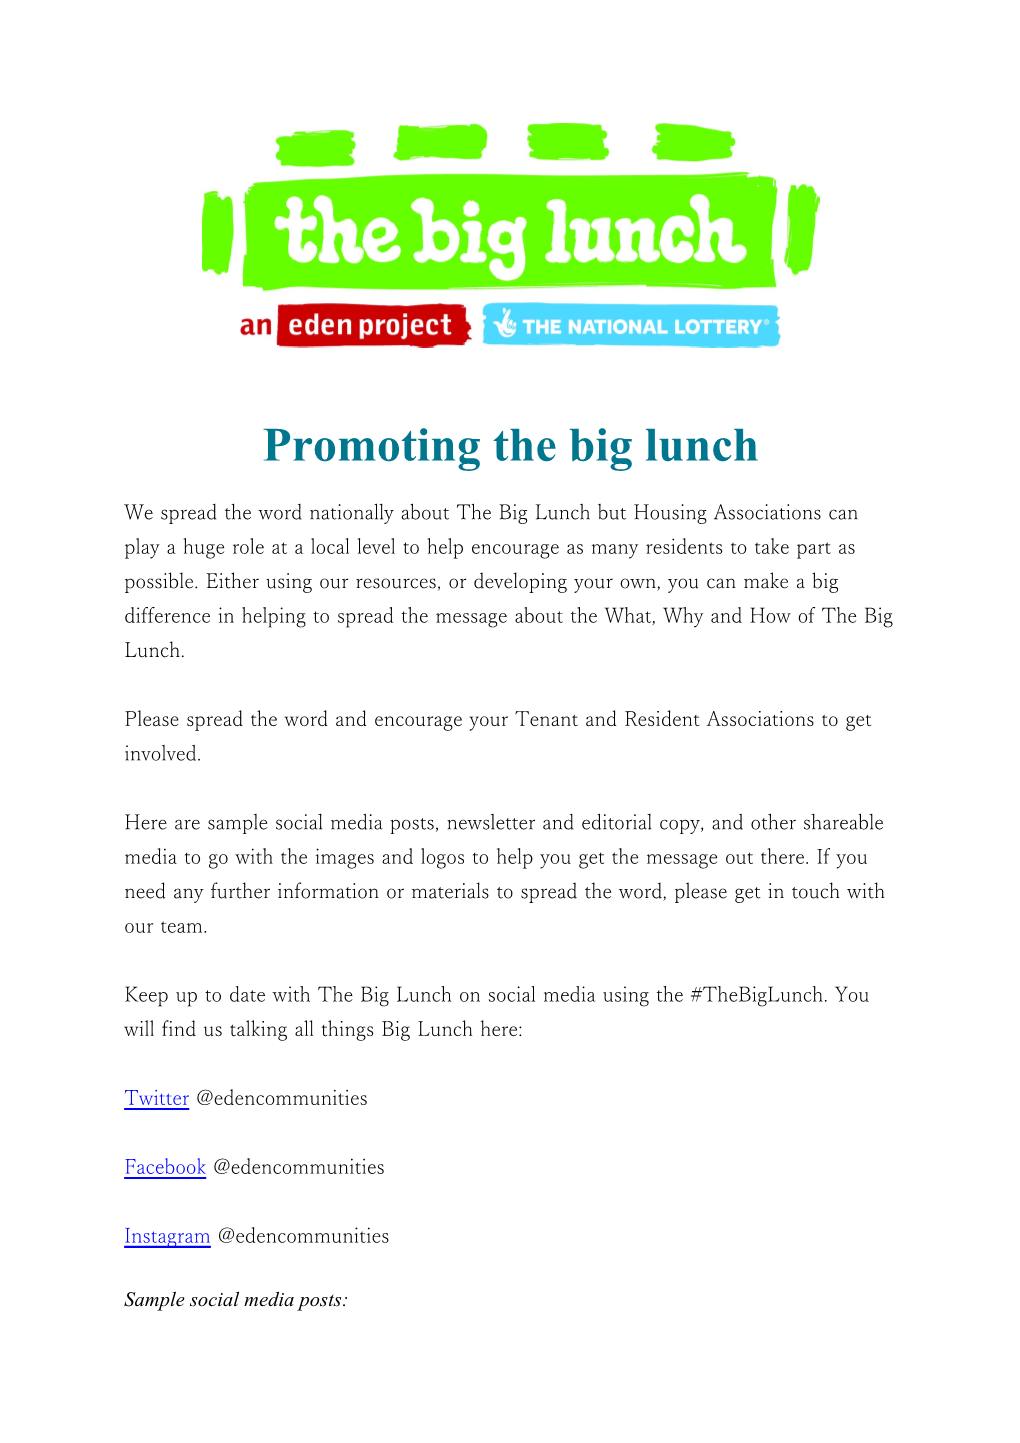 Promoting the Big Lunch